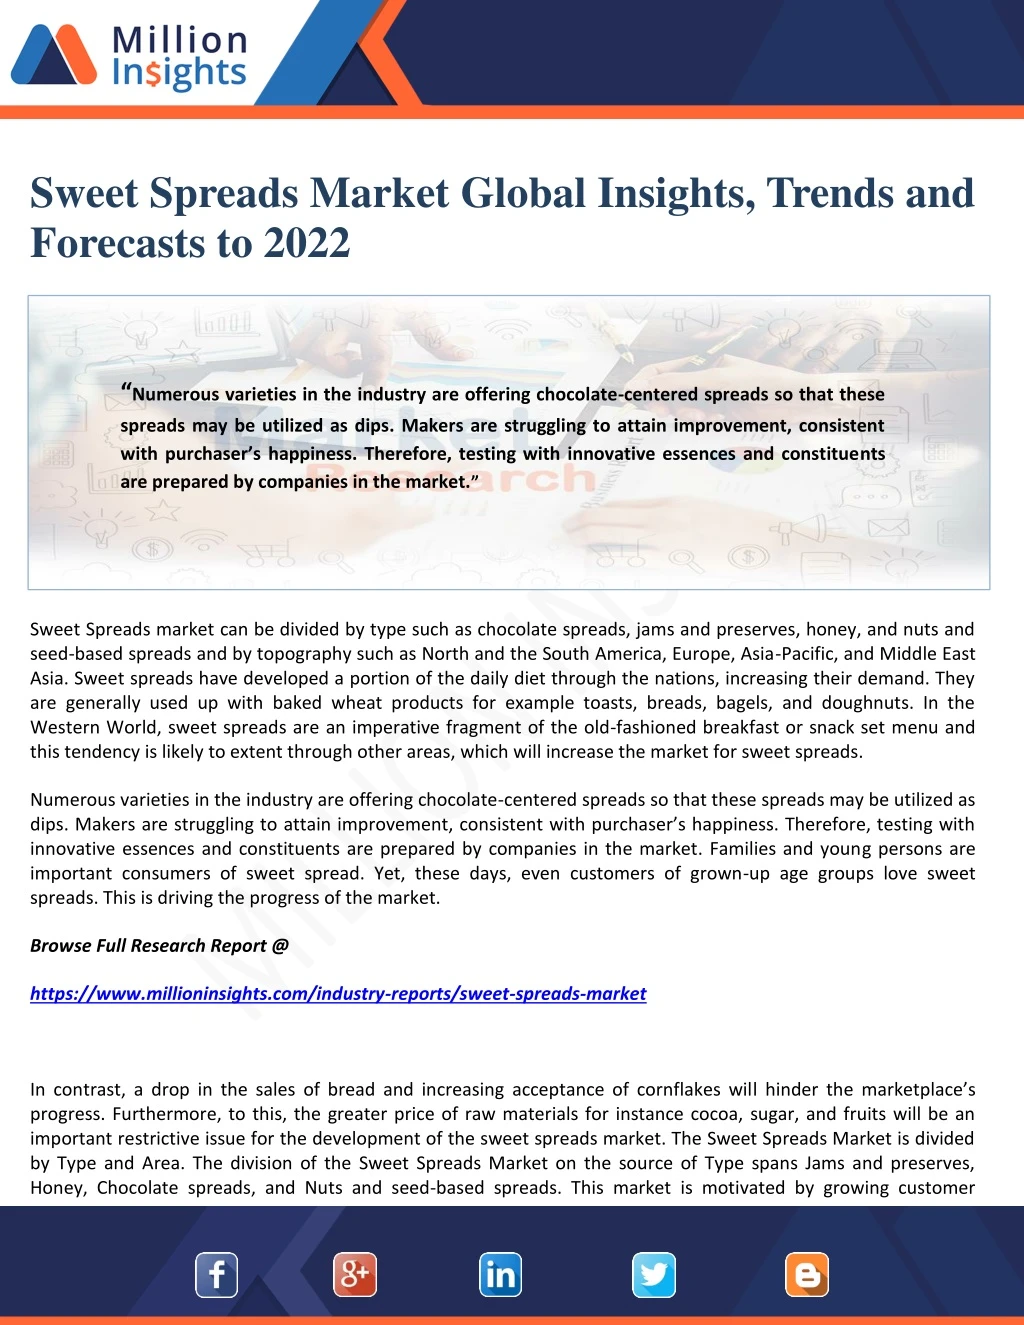 sweet spreads market global insights trends